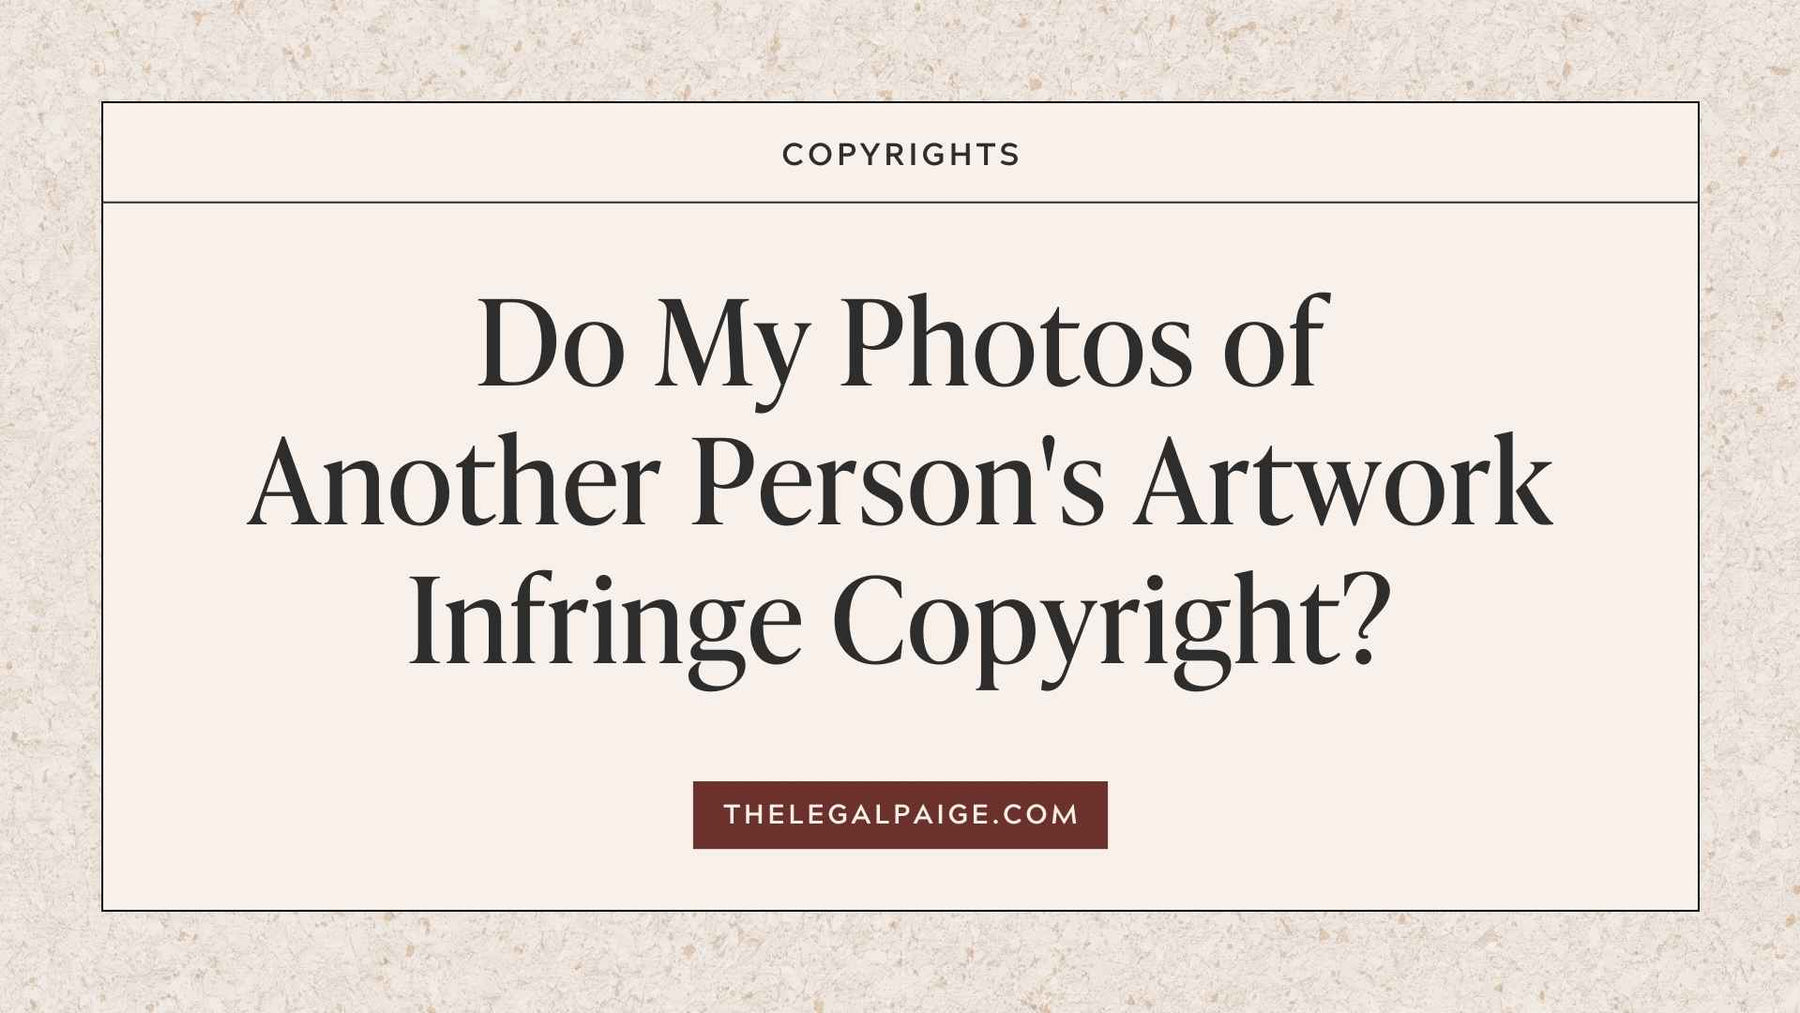 Do My Photos of Another Person's Artwork Infringe Copyright?